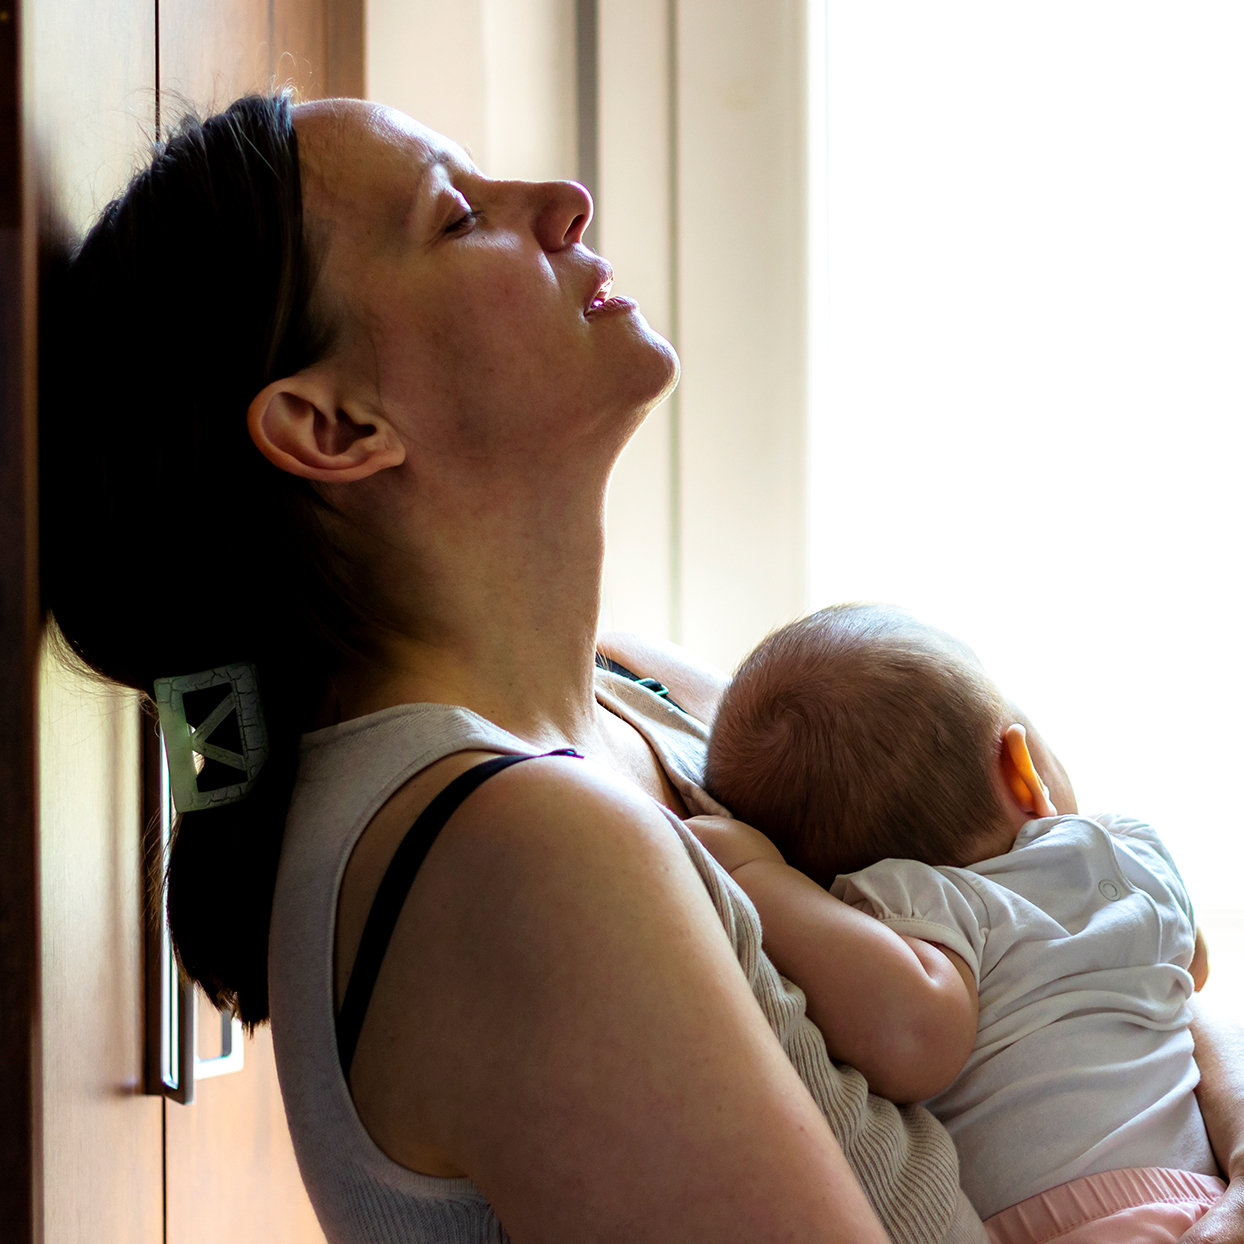 Postpartum Depression Can Last 3 Years After Giving Birth, Study Finds ...